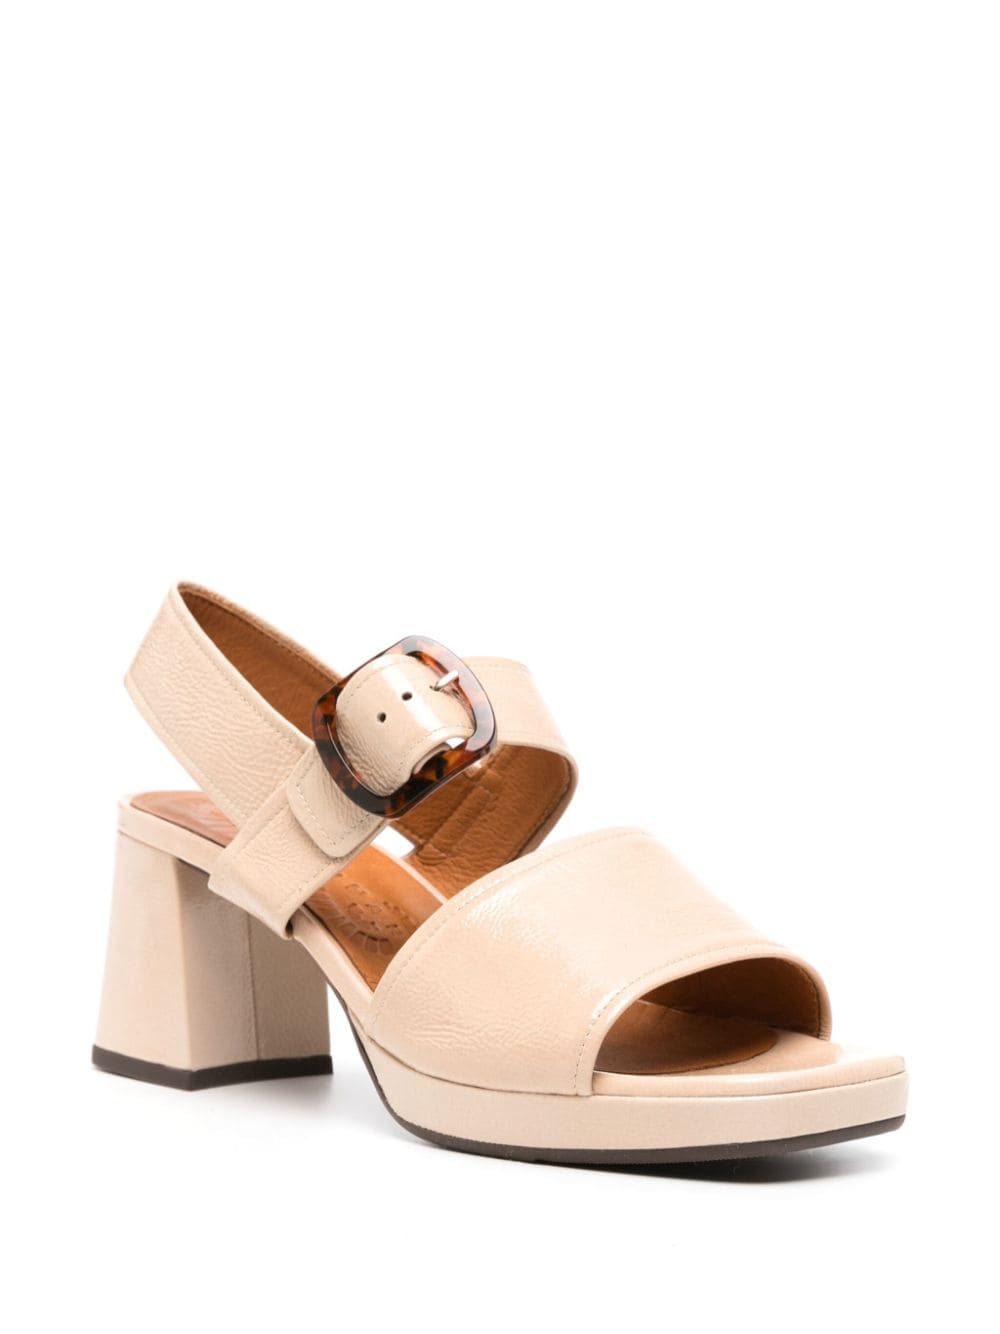 Chie Mihara 70mm Ginka leather sandals - Beige